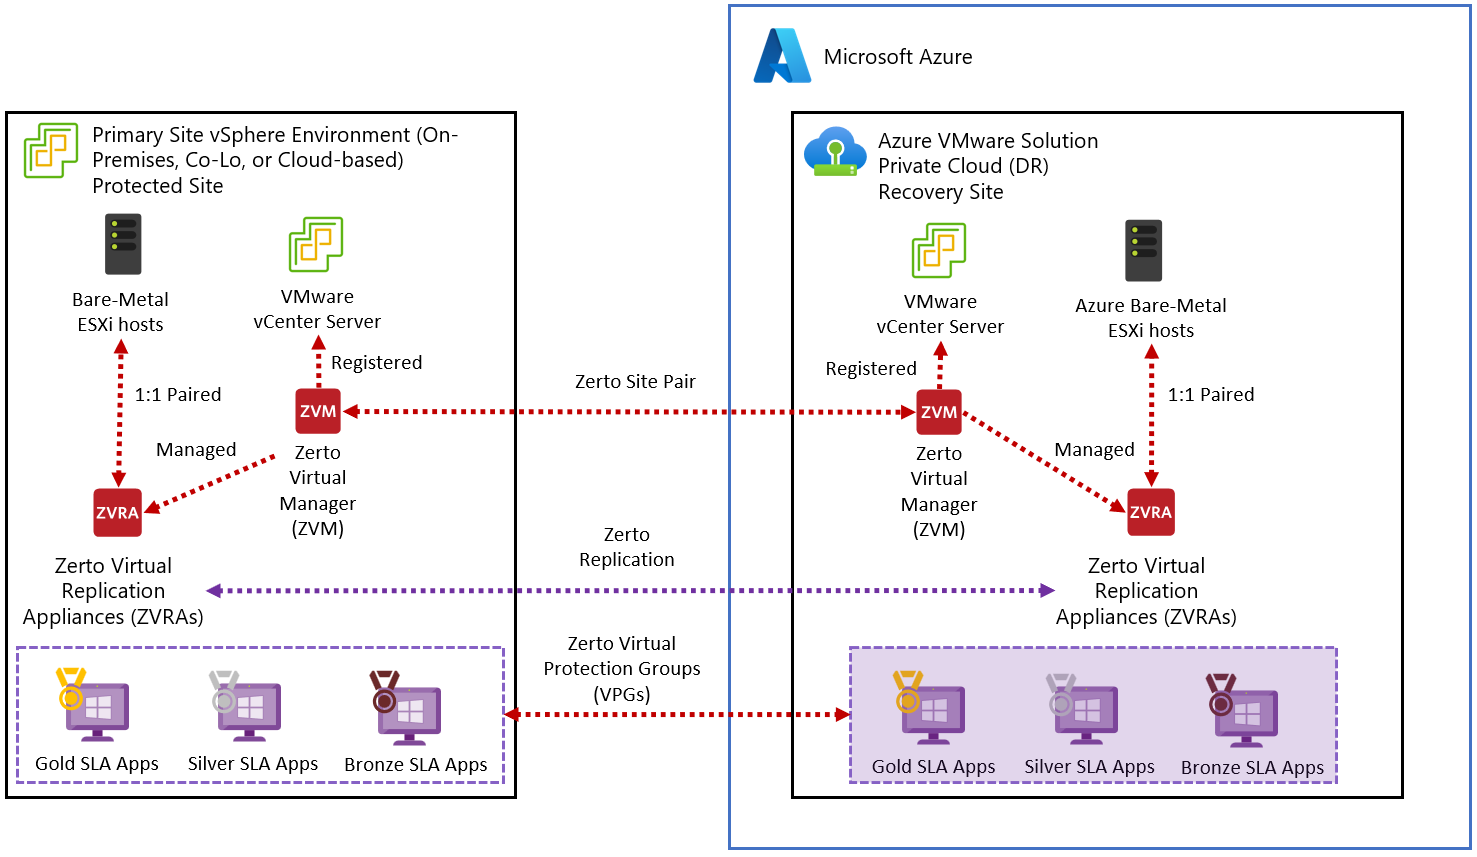 Diagram showing Scenario 1 for the Zerto disaster recovery solution on Azure VMware Solution.